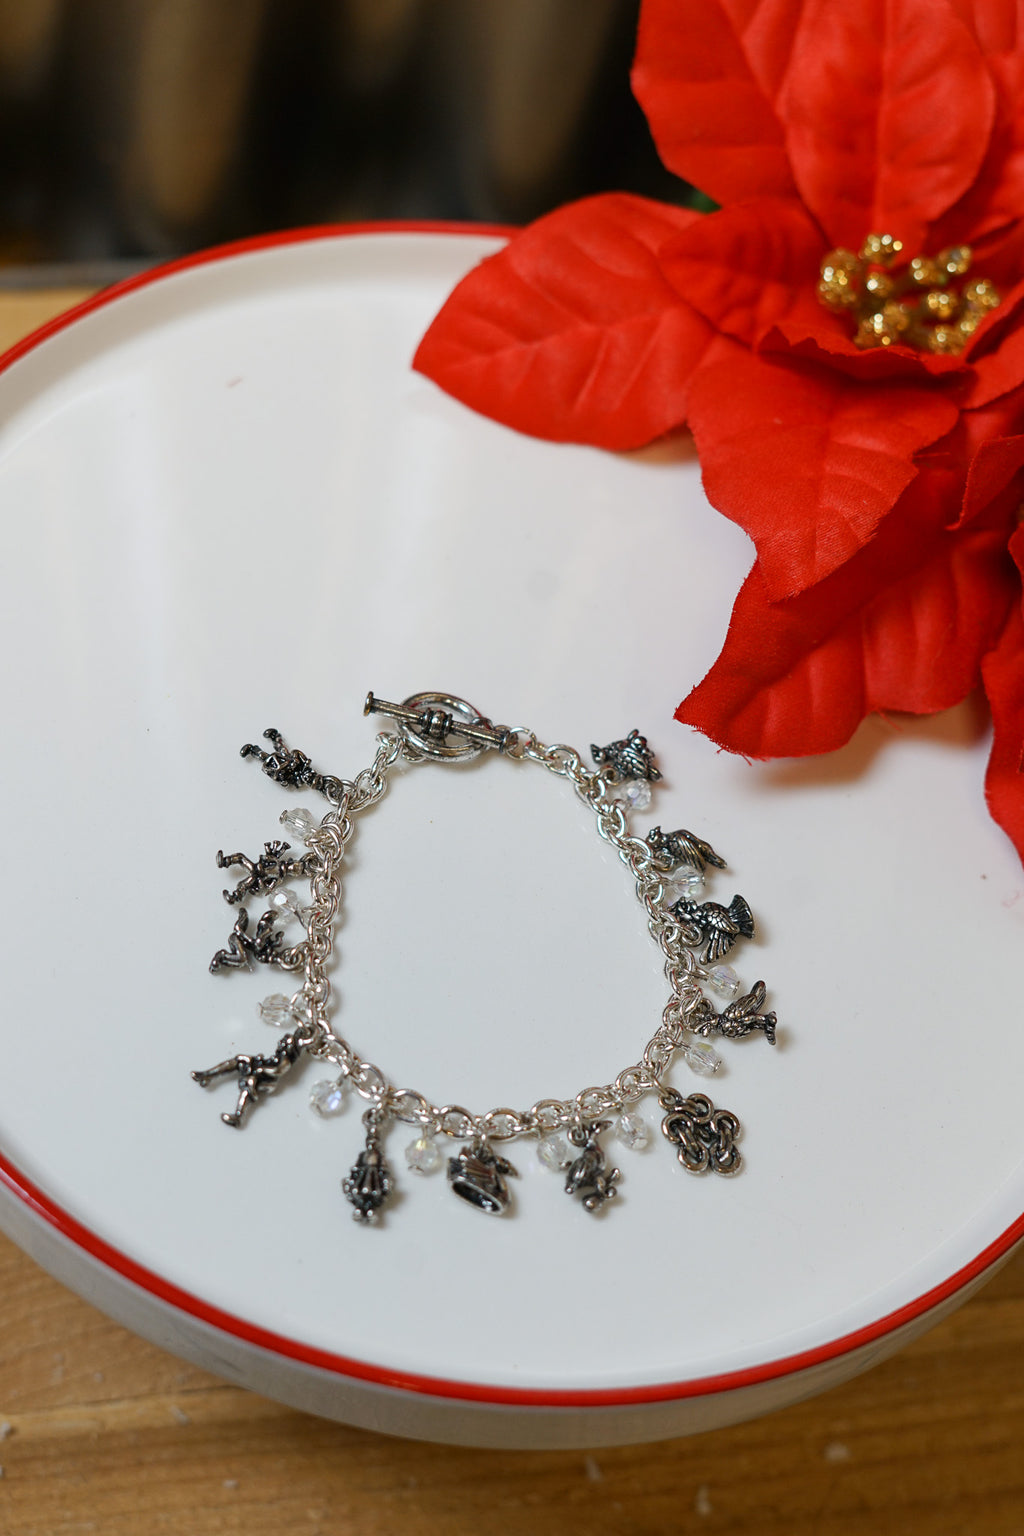 The 12 Days Of Christmas Charm Bracelet in Silver